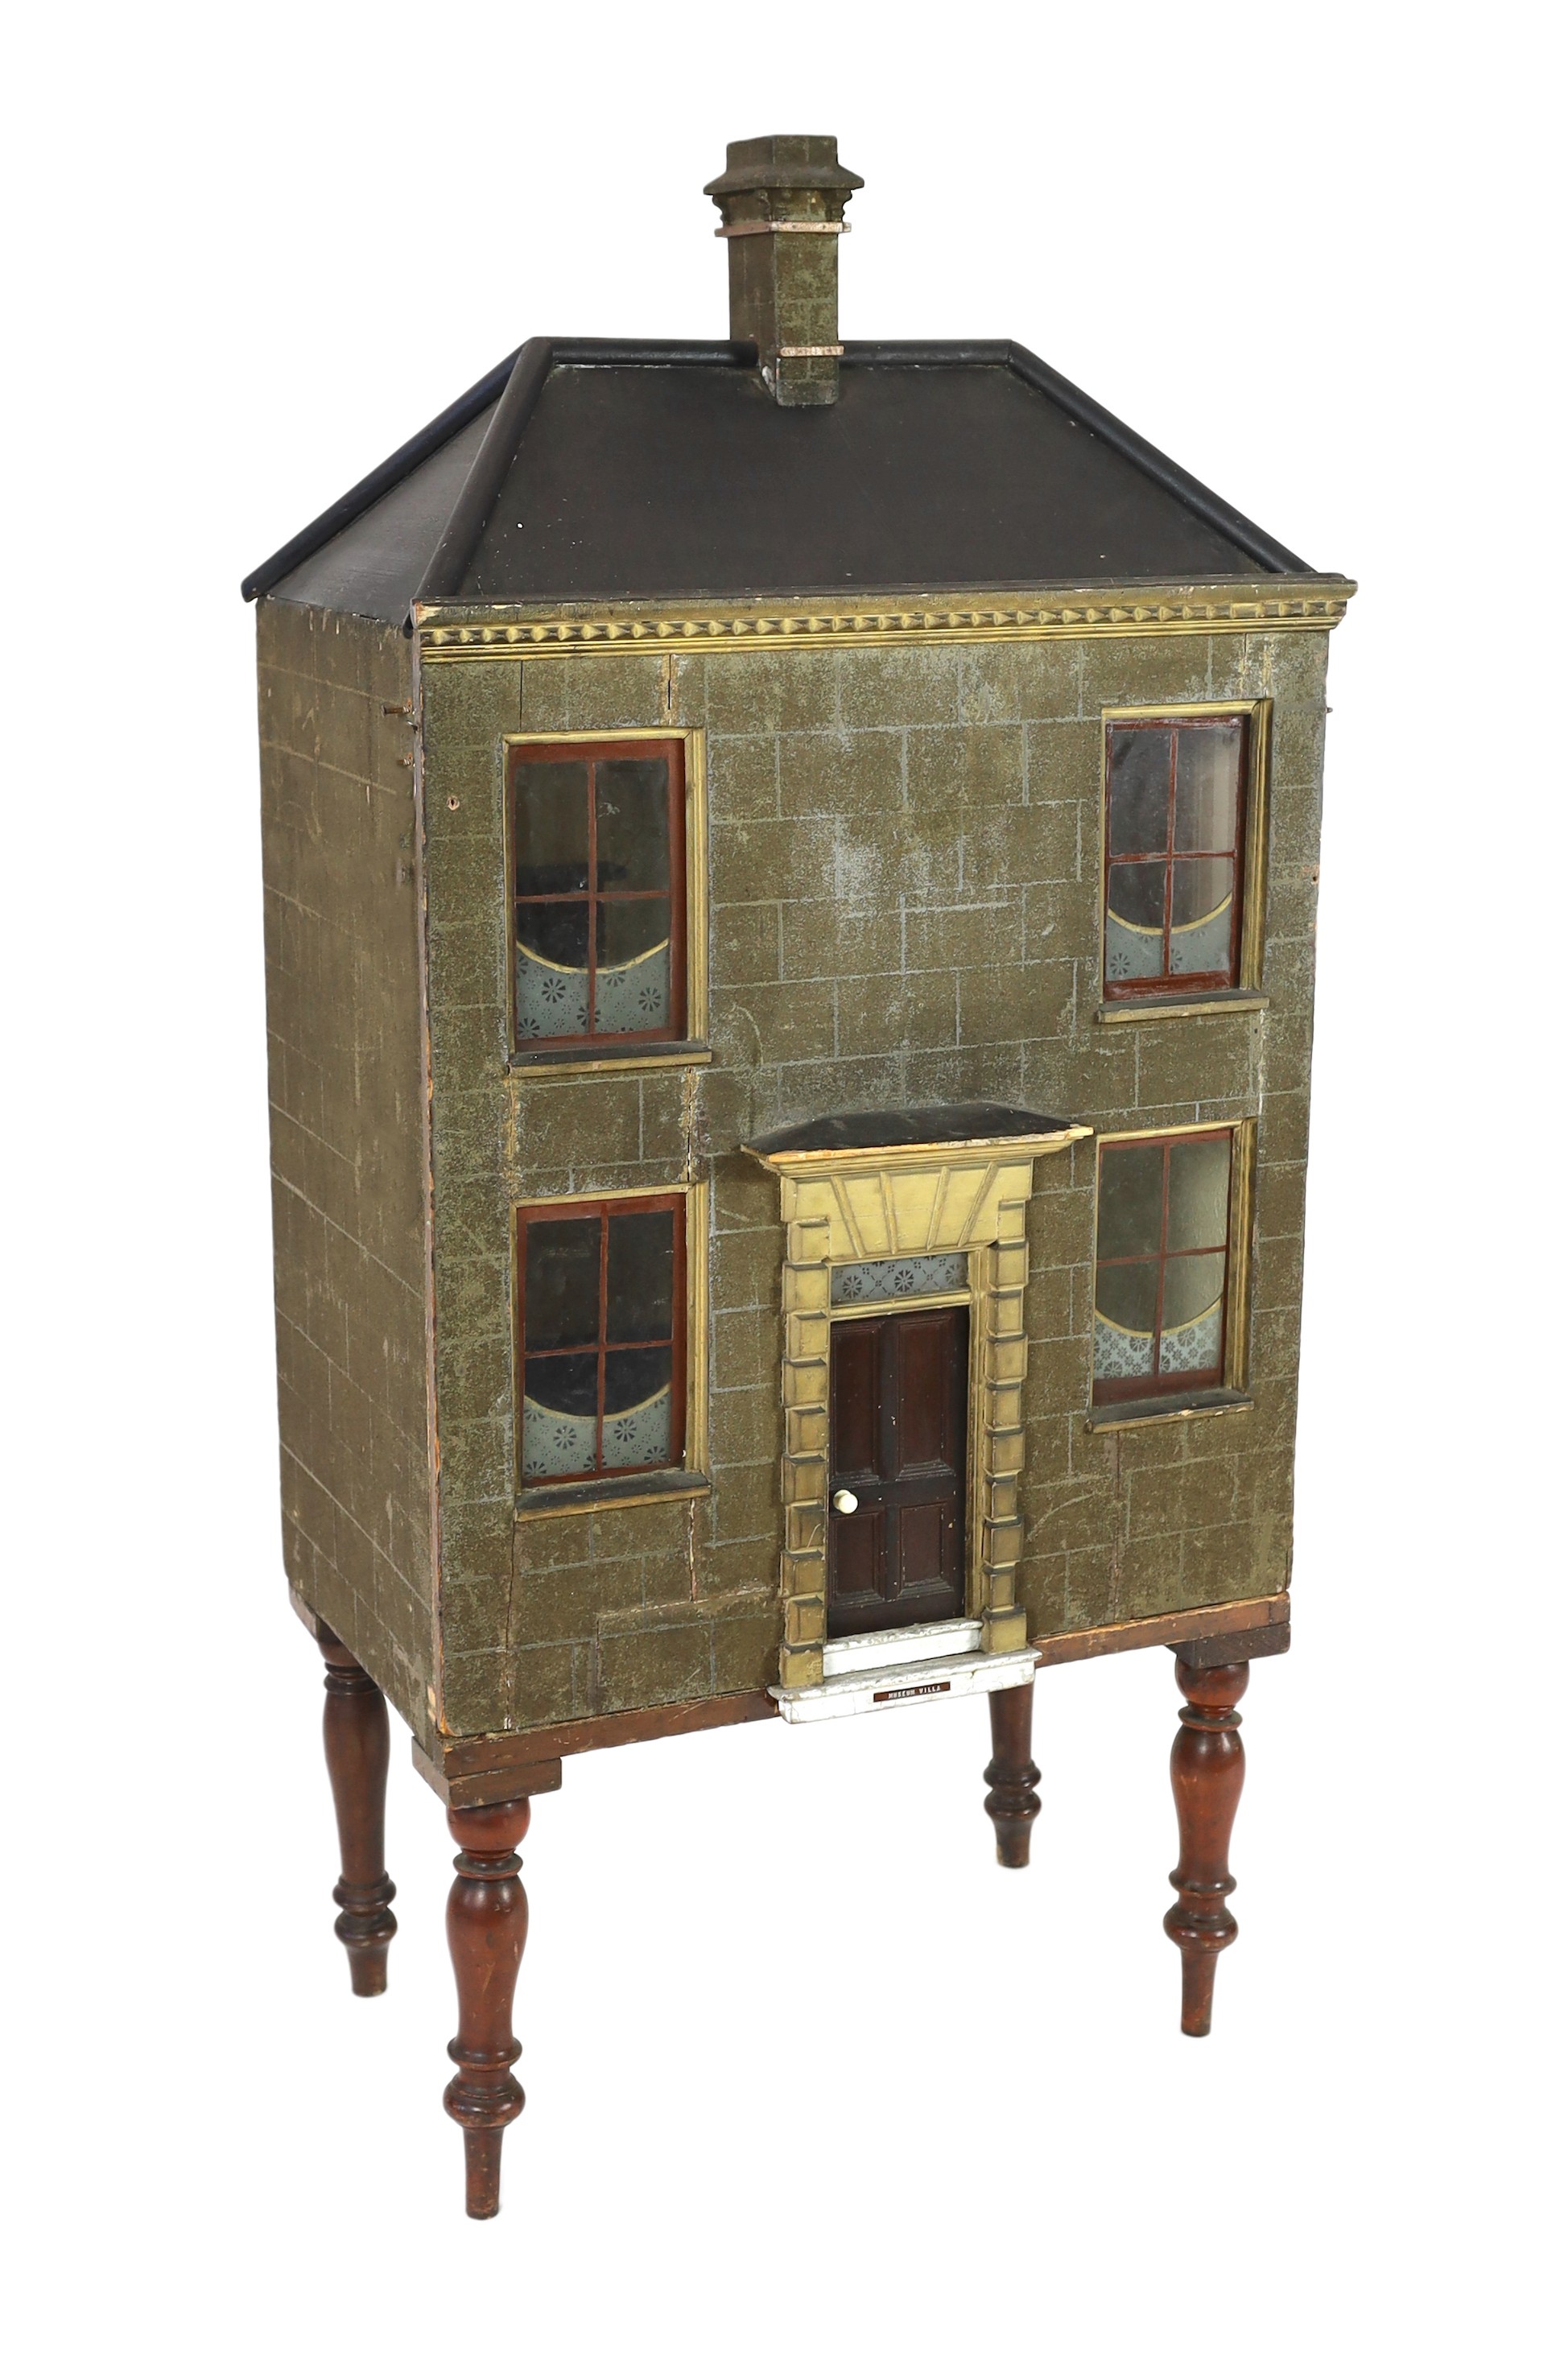 'Museum Villa': A mid 19th century furnished English dolls’ house                                                                                                                                                           